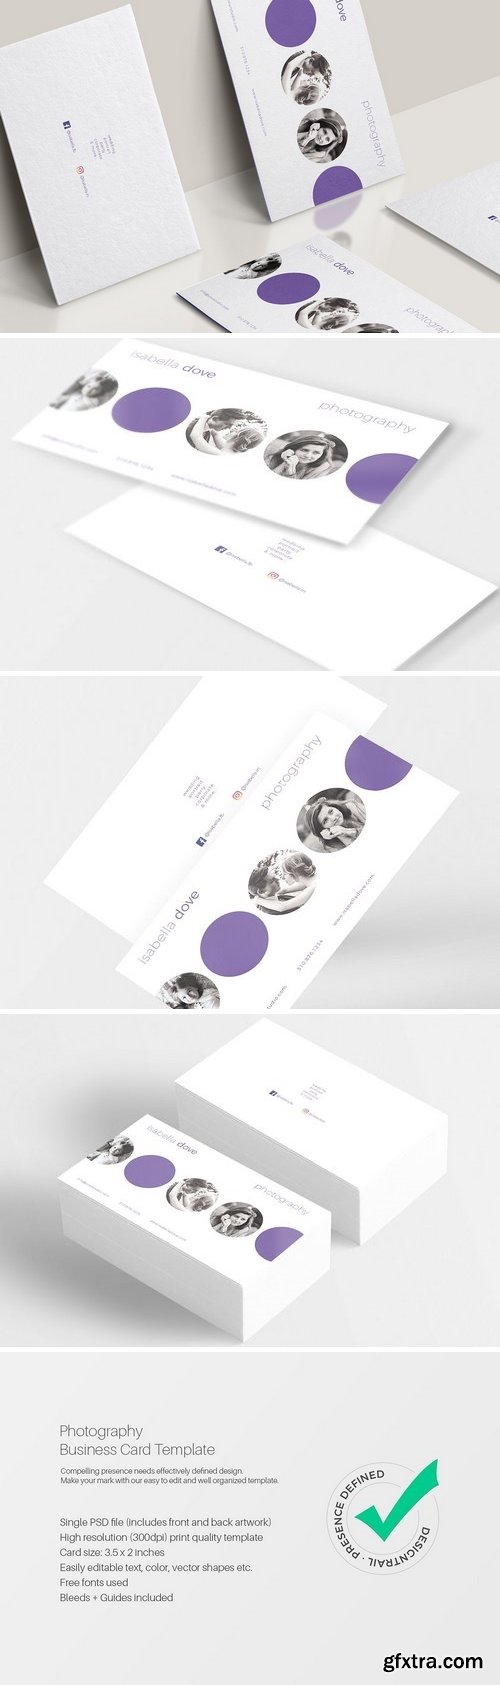 CM - Photography Business Card Template 1569861